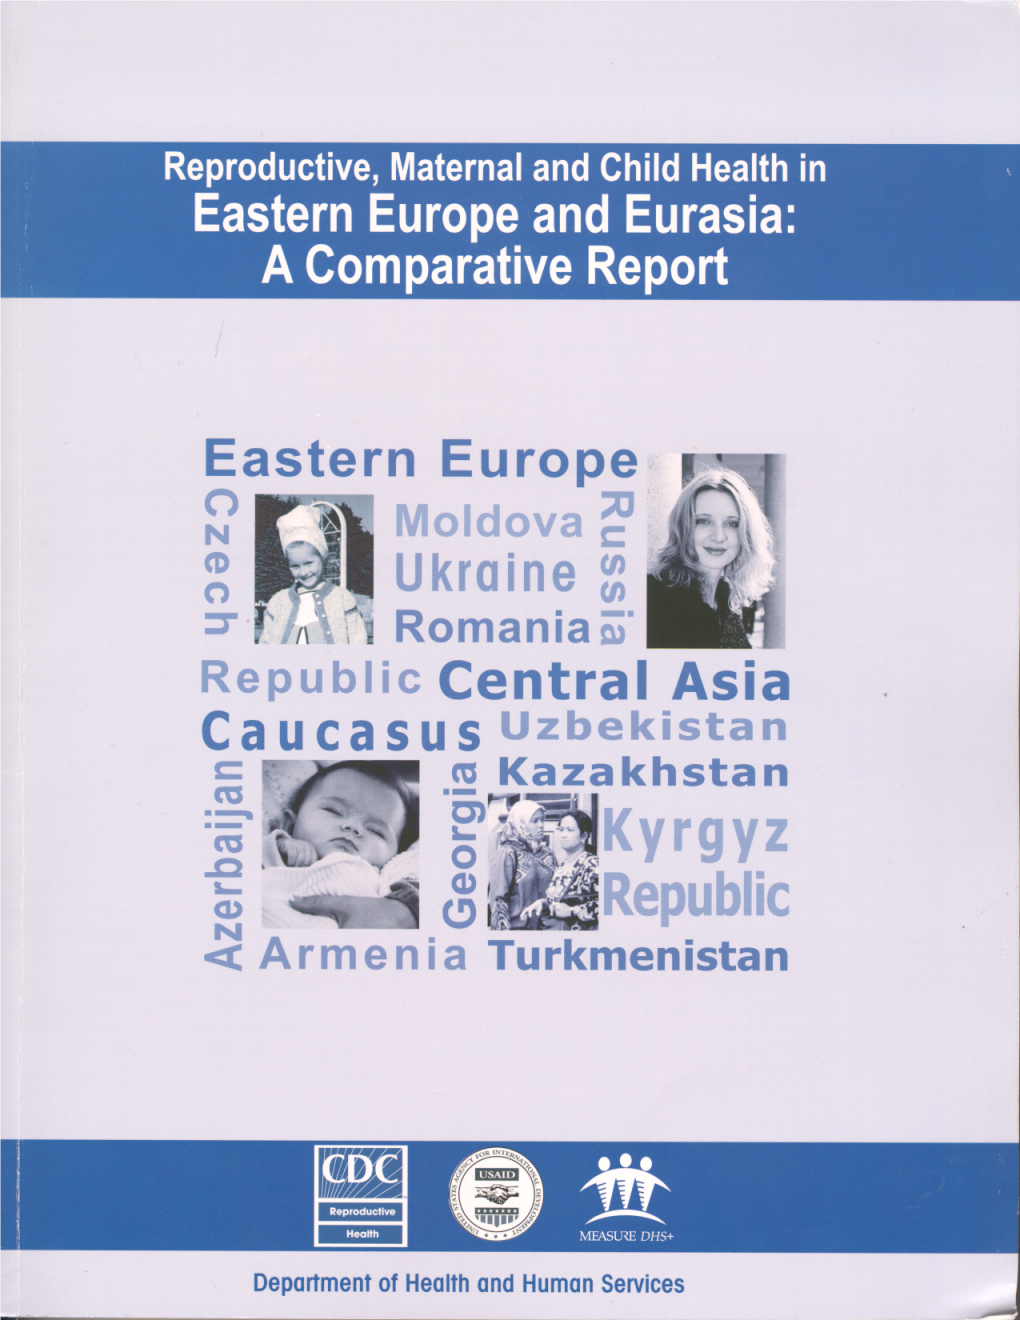 Reproductive, Maternal and Child Health in Eastern Europe and Eurasia: a Comparative Report